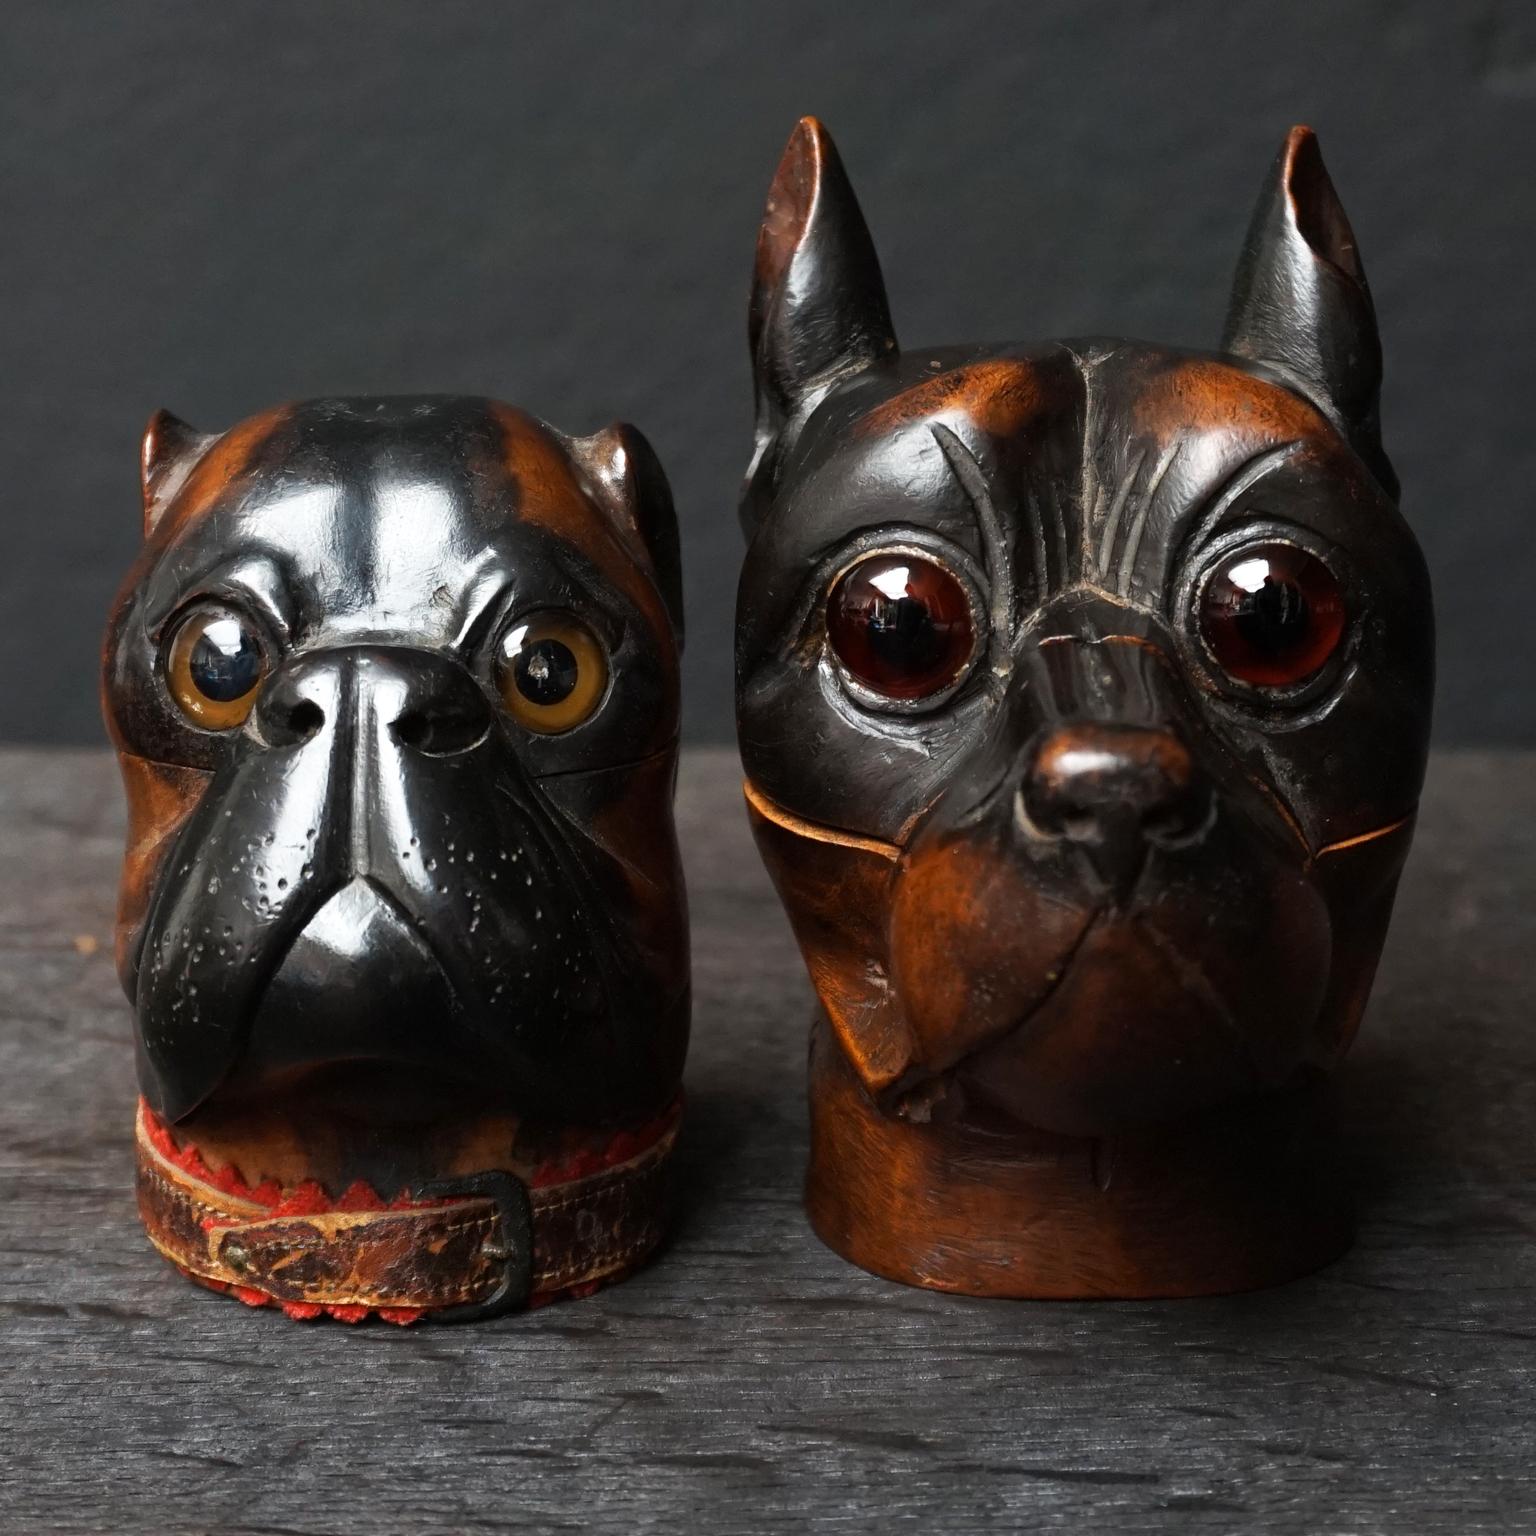 Set of two very beautiful original 19th century carved heavy wooden Victorian era dog inkwells with hinged head that opens to reveal the inkwells inside. They are made of heavy Lignum Vitae or Pockwood, they both have glass eyes.

The bulldog has